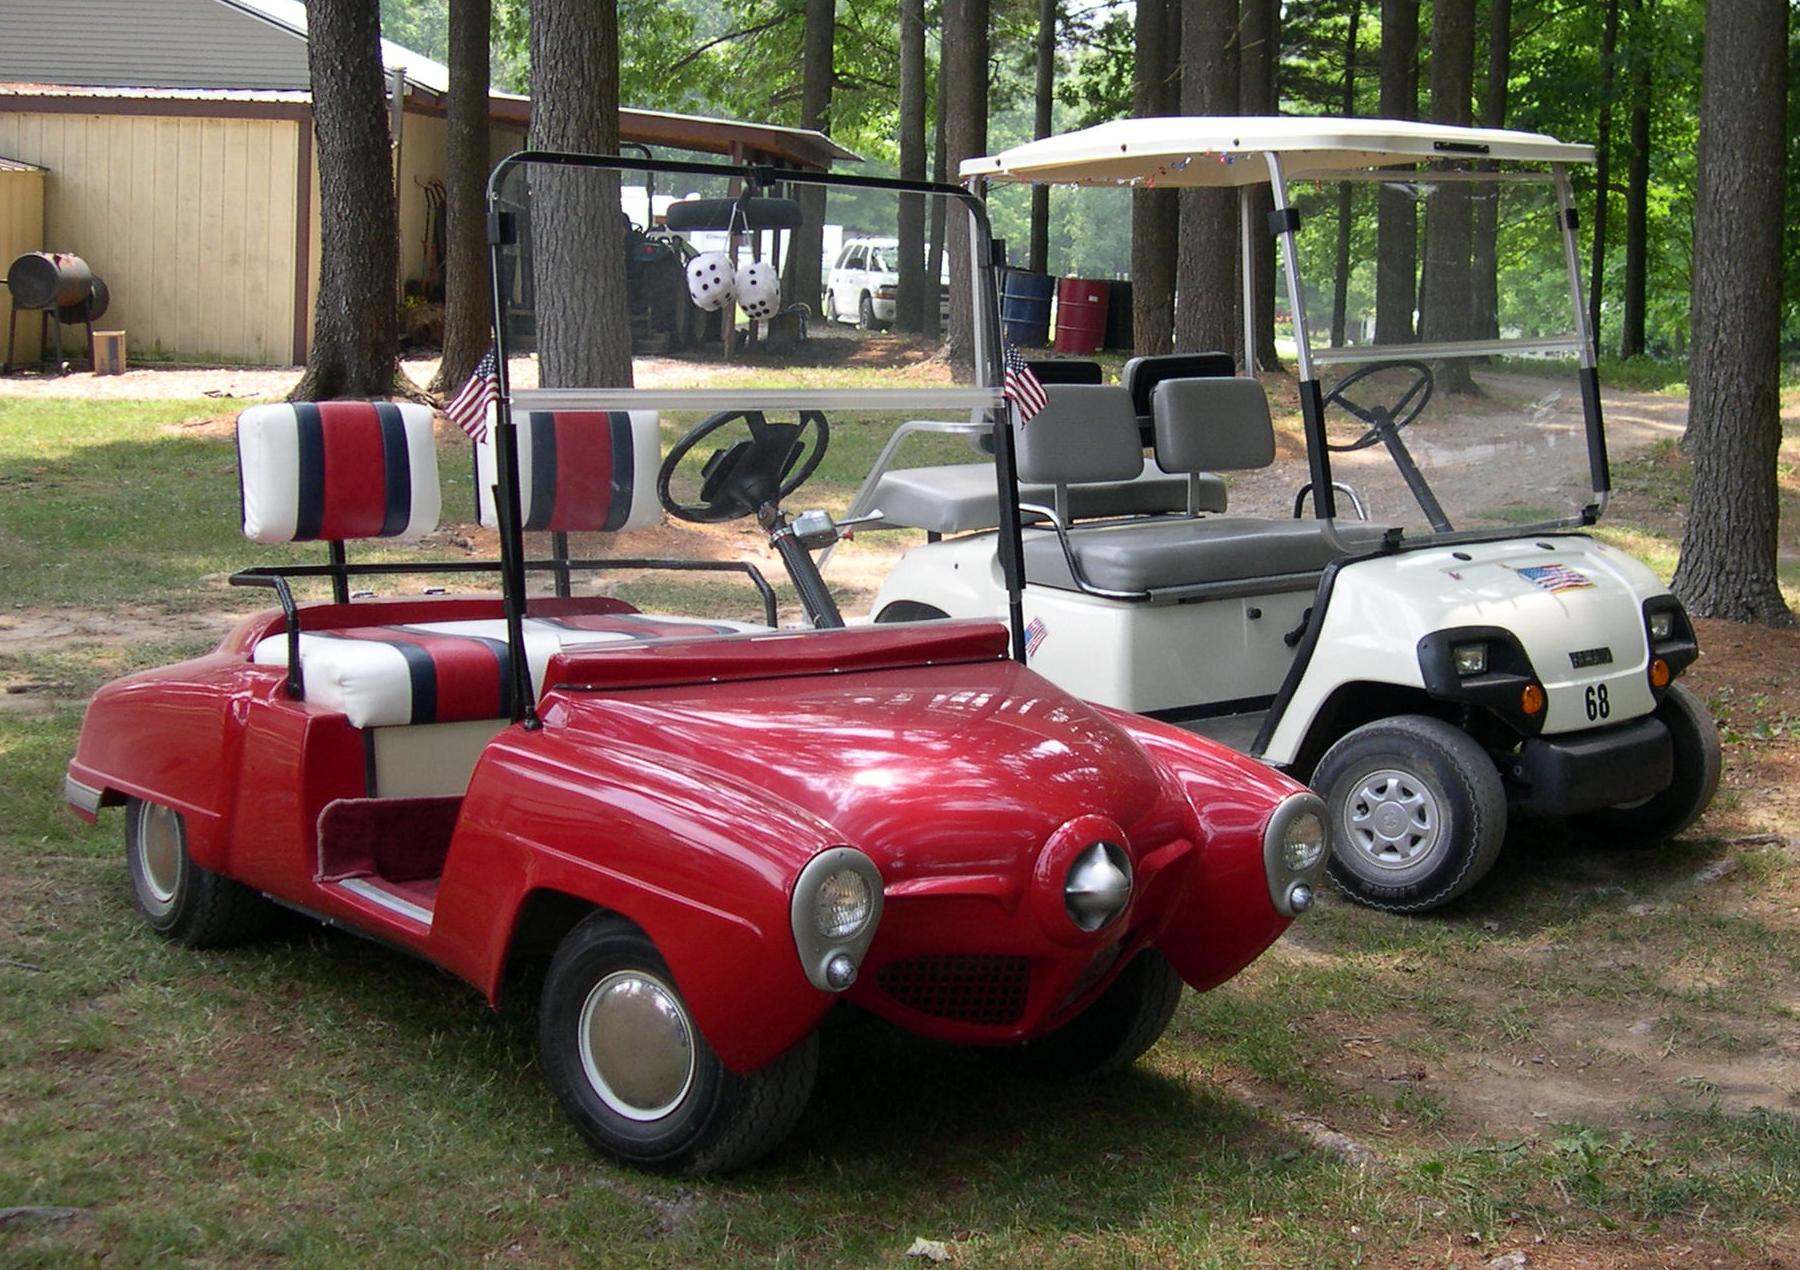 Try DecoratingYour Golf Cart and Get in the Holiday Spirit 